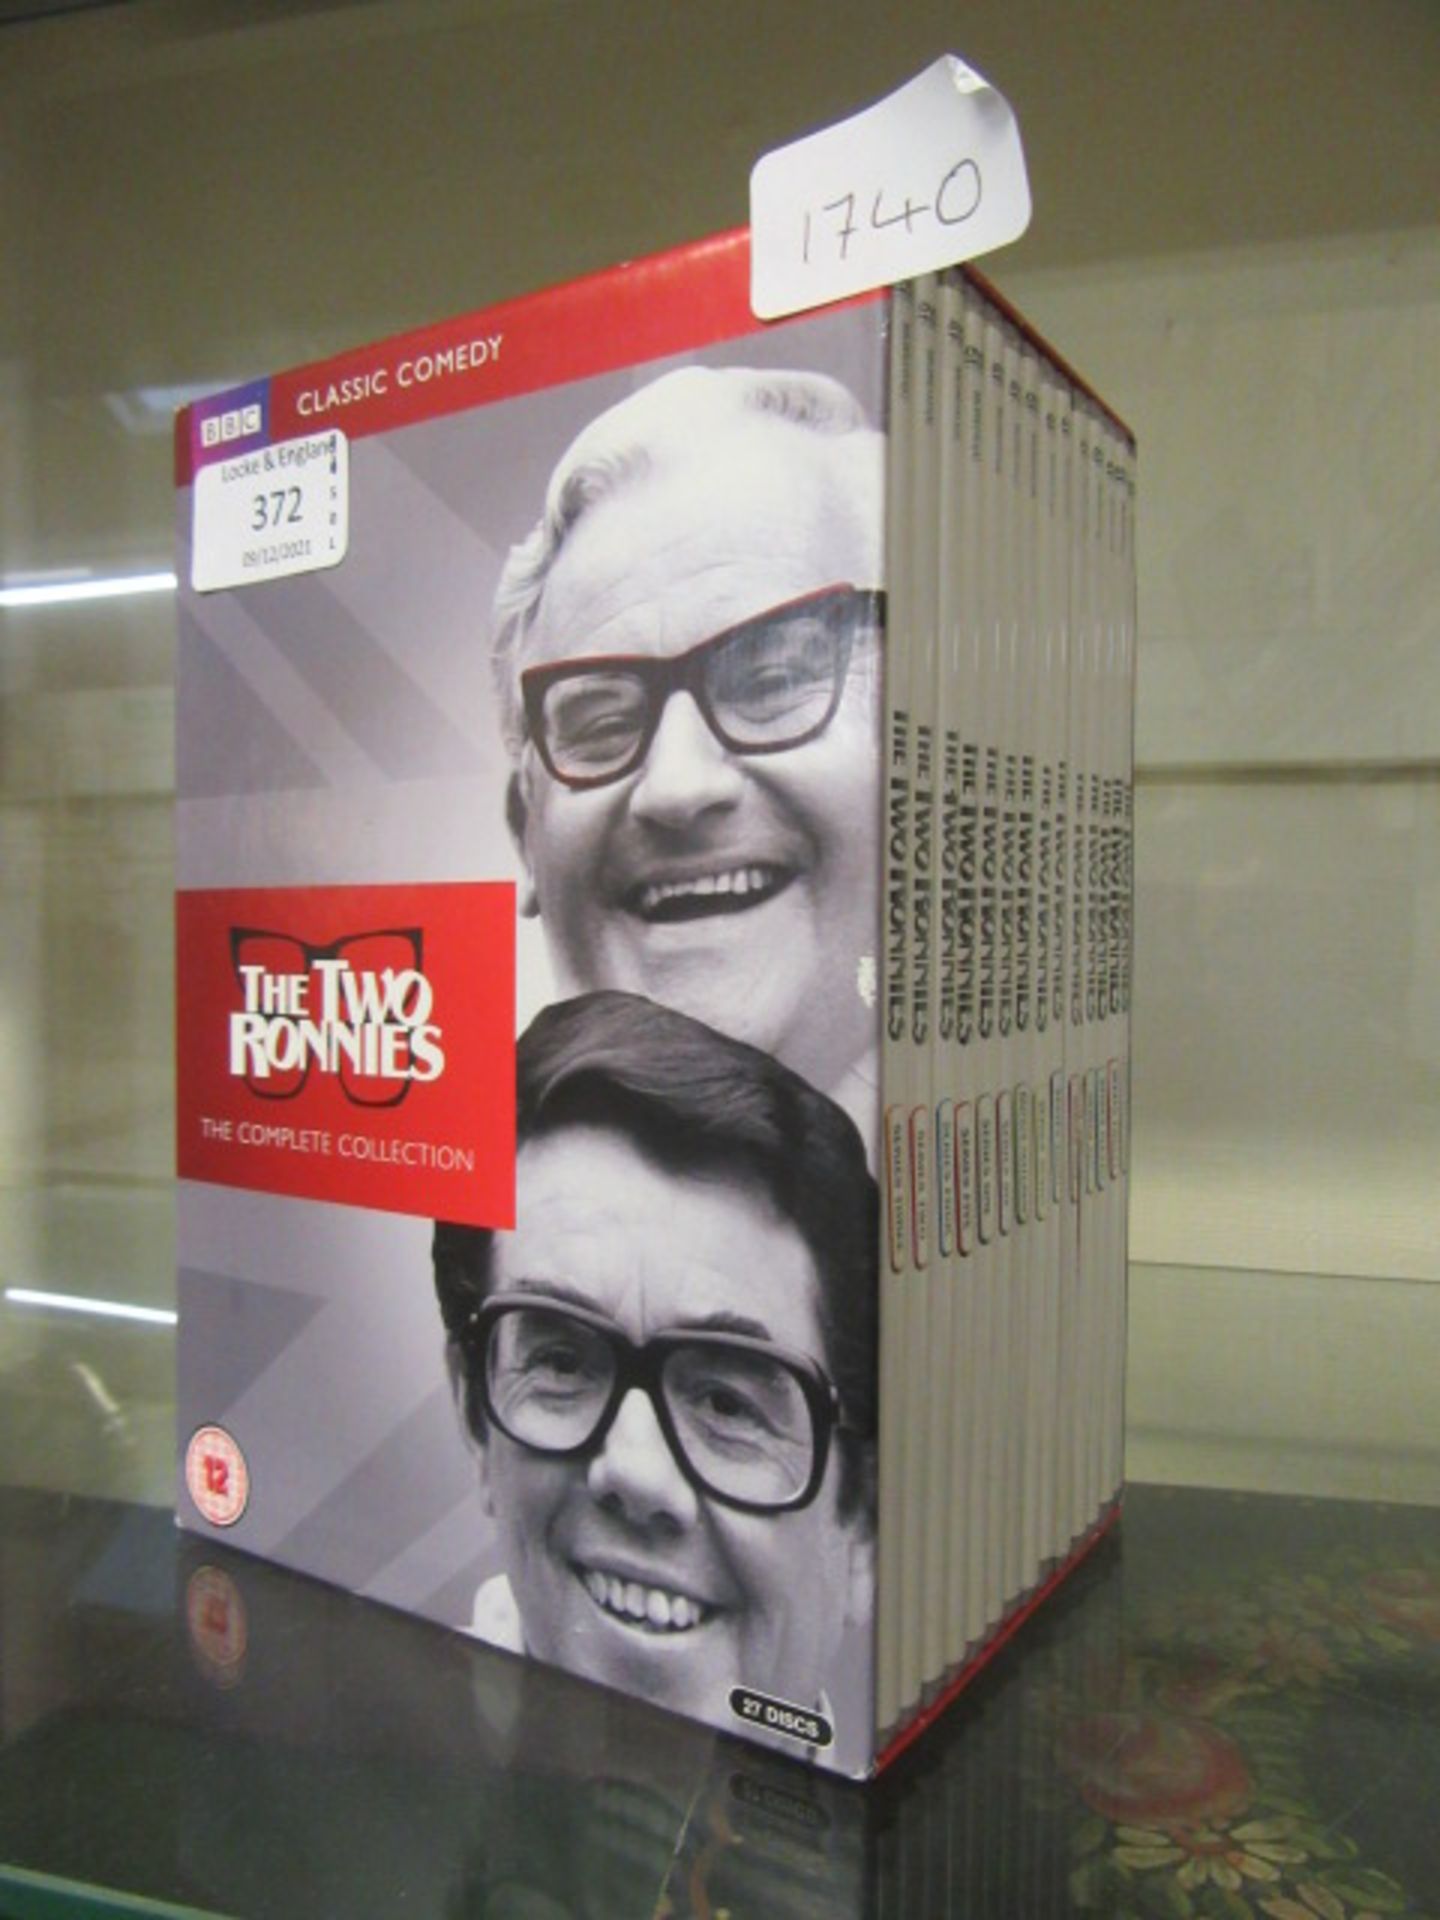 A boxed set of BBC classic comedy 'The Two Ronnies: The Complete Collection'